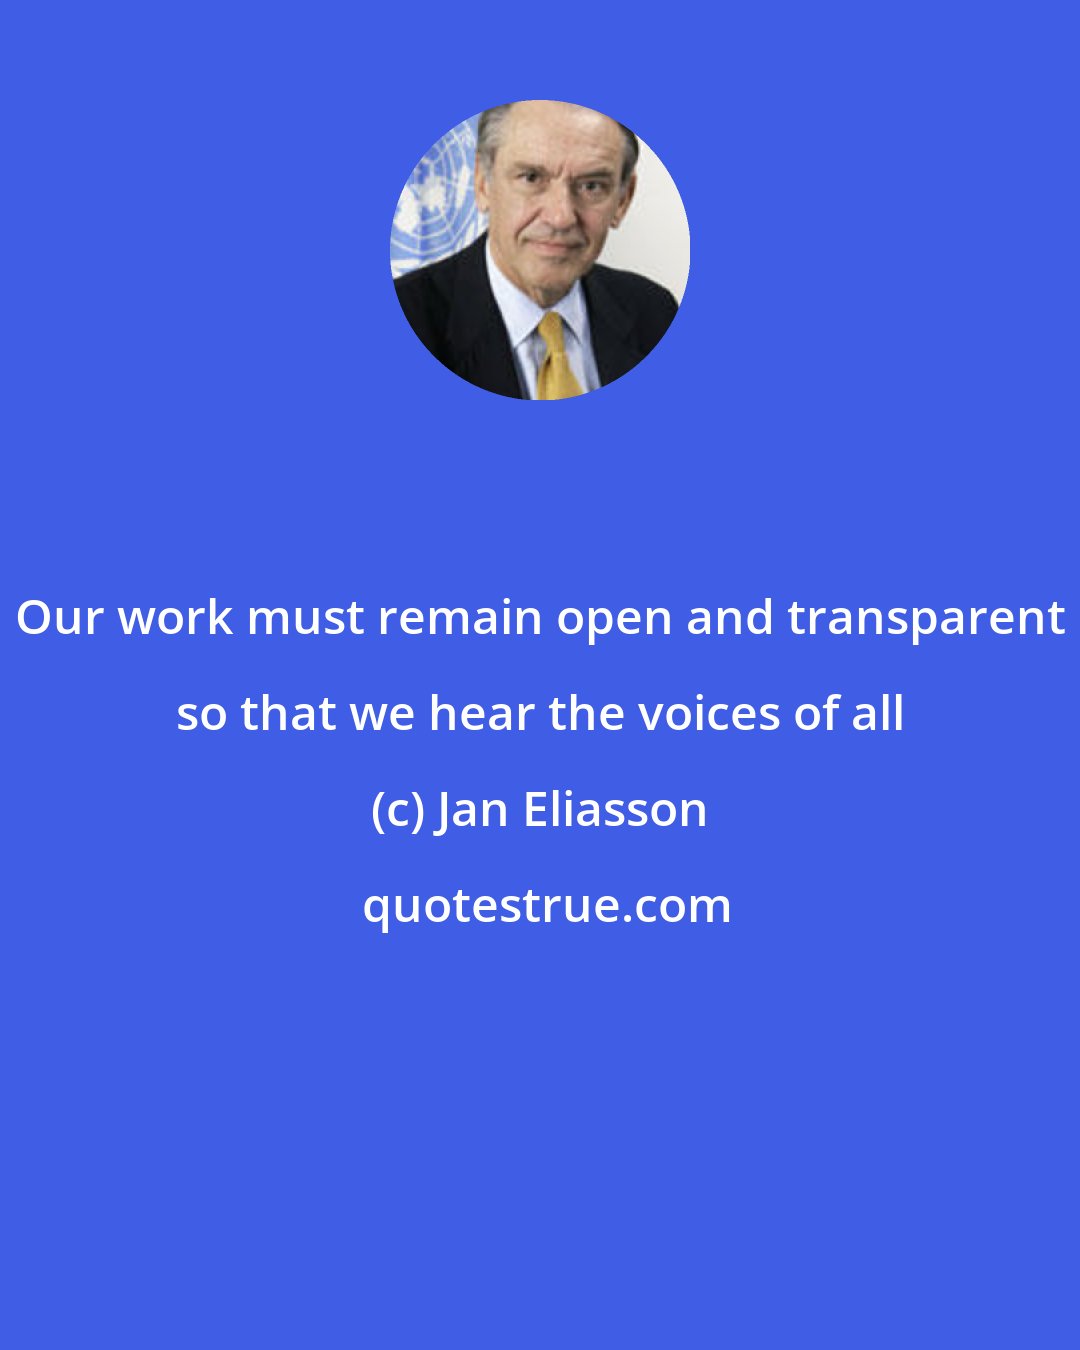 Jan Eliasson: Our work must remain open and transparent so that we hear the voices of all